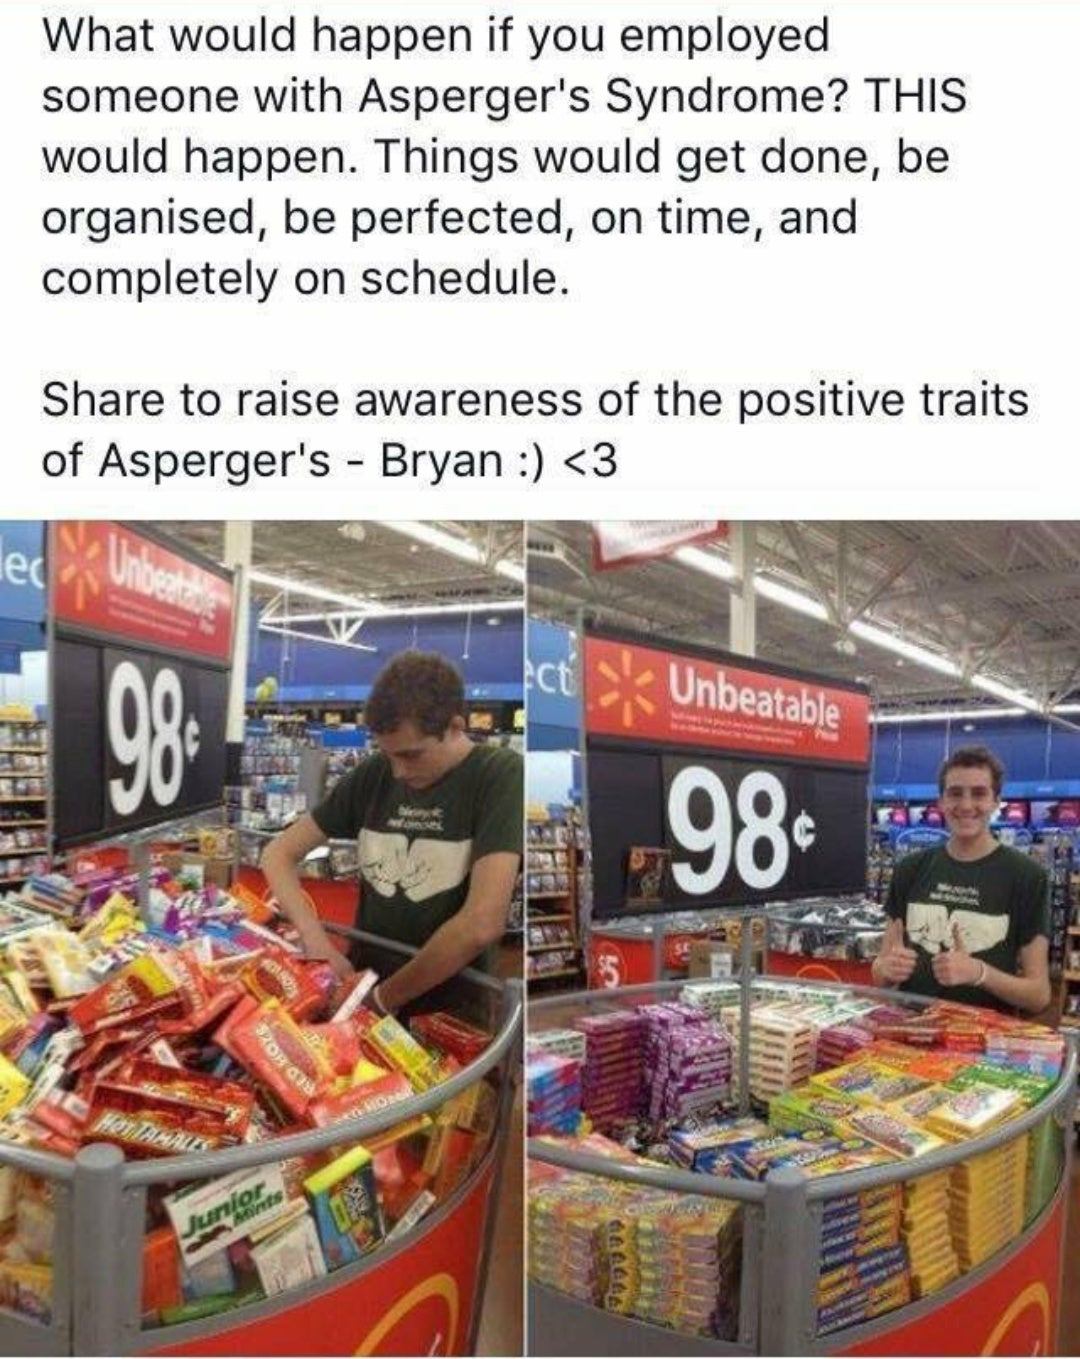 walmart memes - What would happen if you employed someone with Asperger's Syndrome? This would happen. Things would get done, be organised, be perfected, on time, and completely on schedule. to raise awareness of the positive traits of Asperger's Bryan